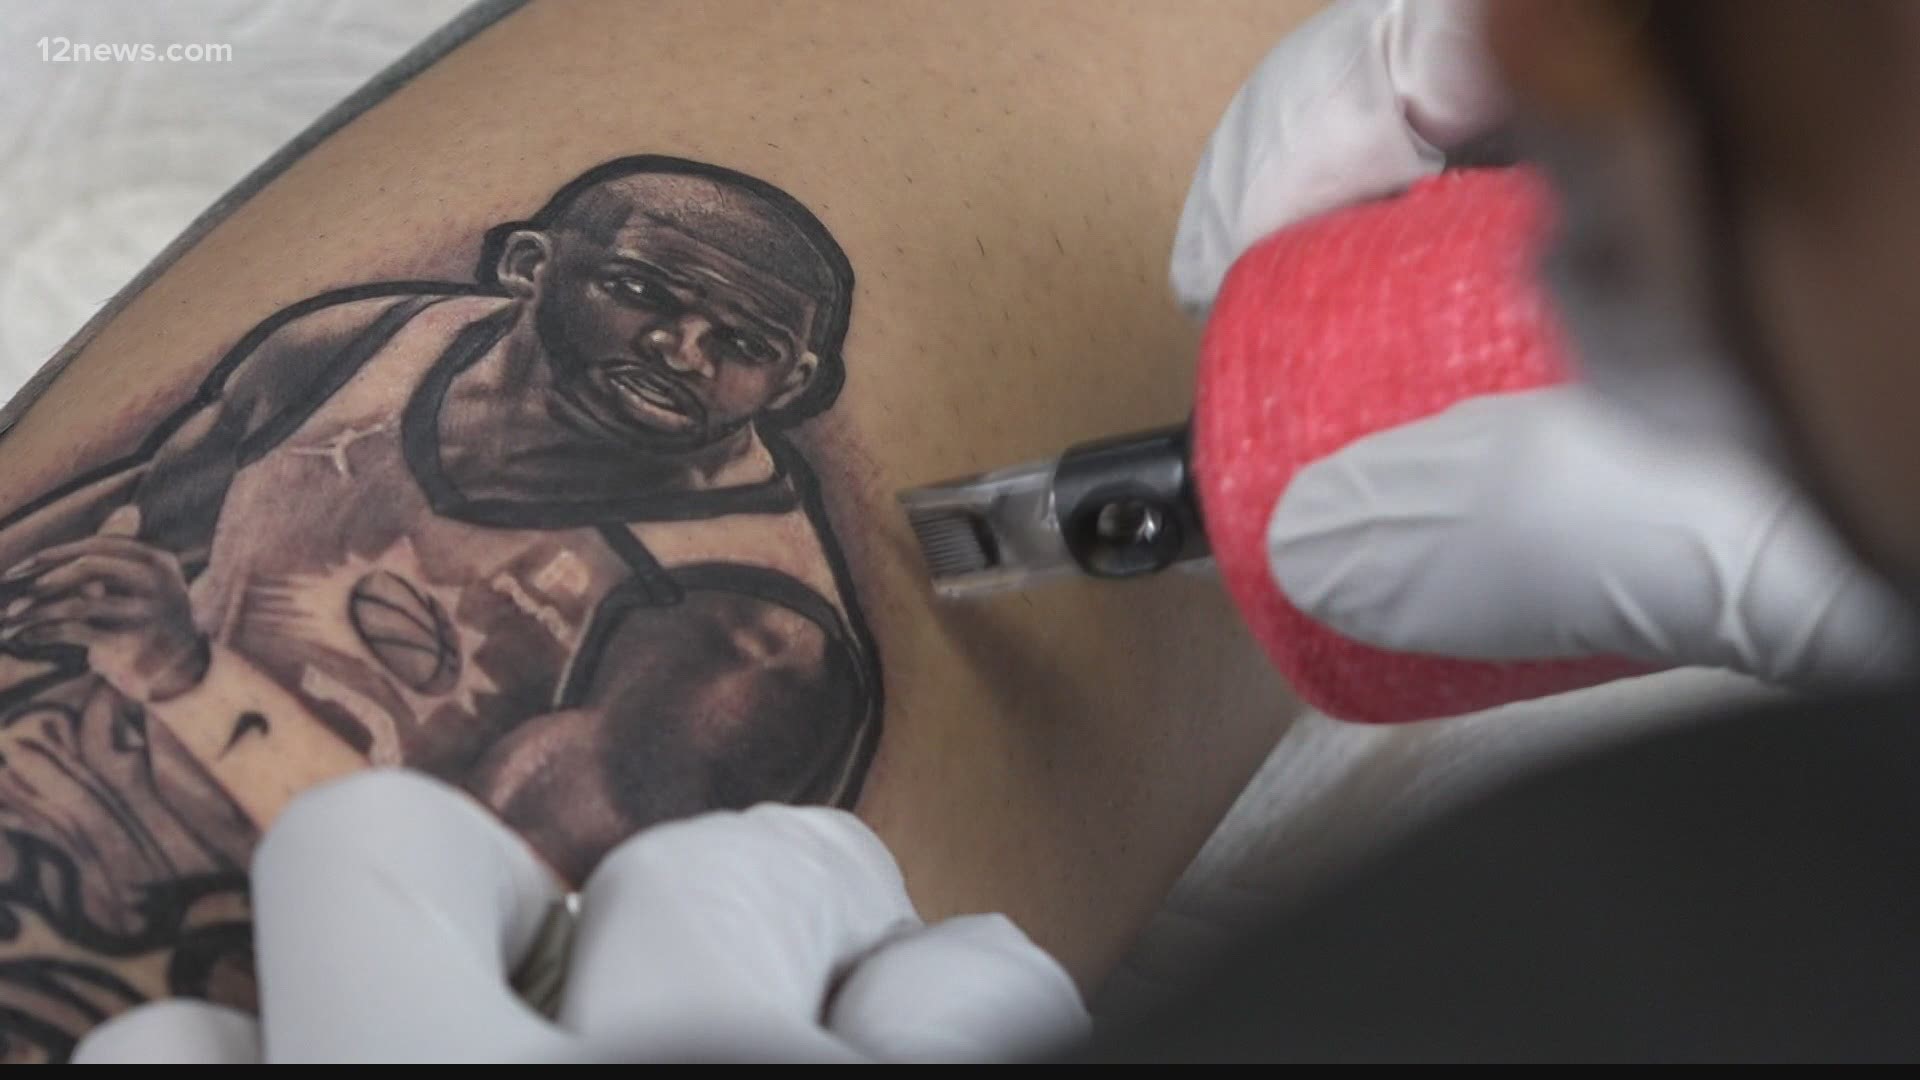 With a needle and some ink, die-hard fan Diego Lopez celebrated the Phoenix Suns making it to the NBA Finals by getting Chris Paul tattooed on his leg.